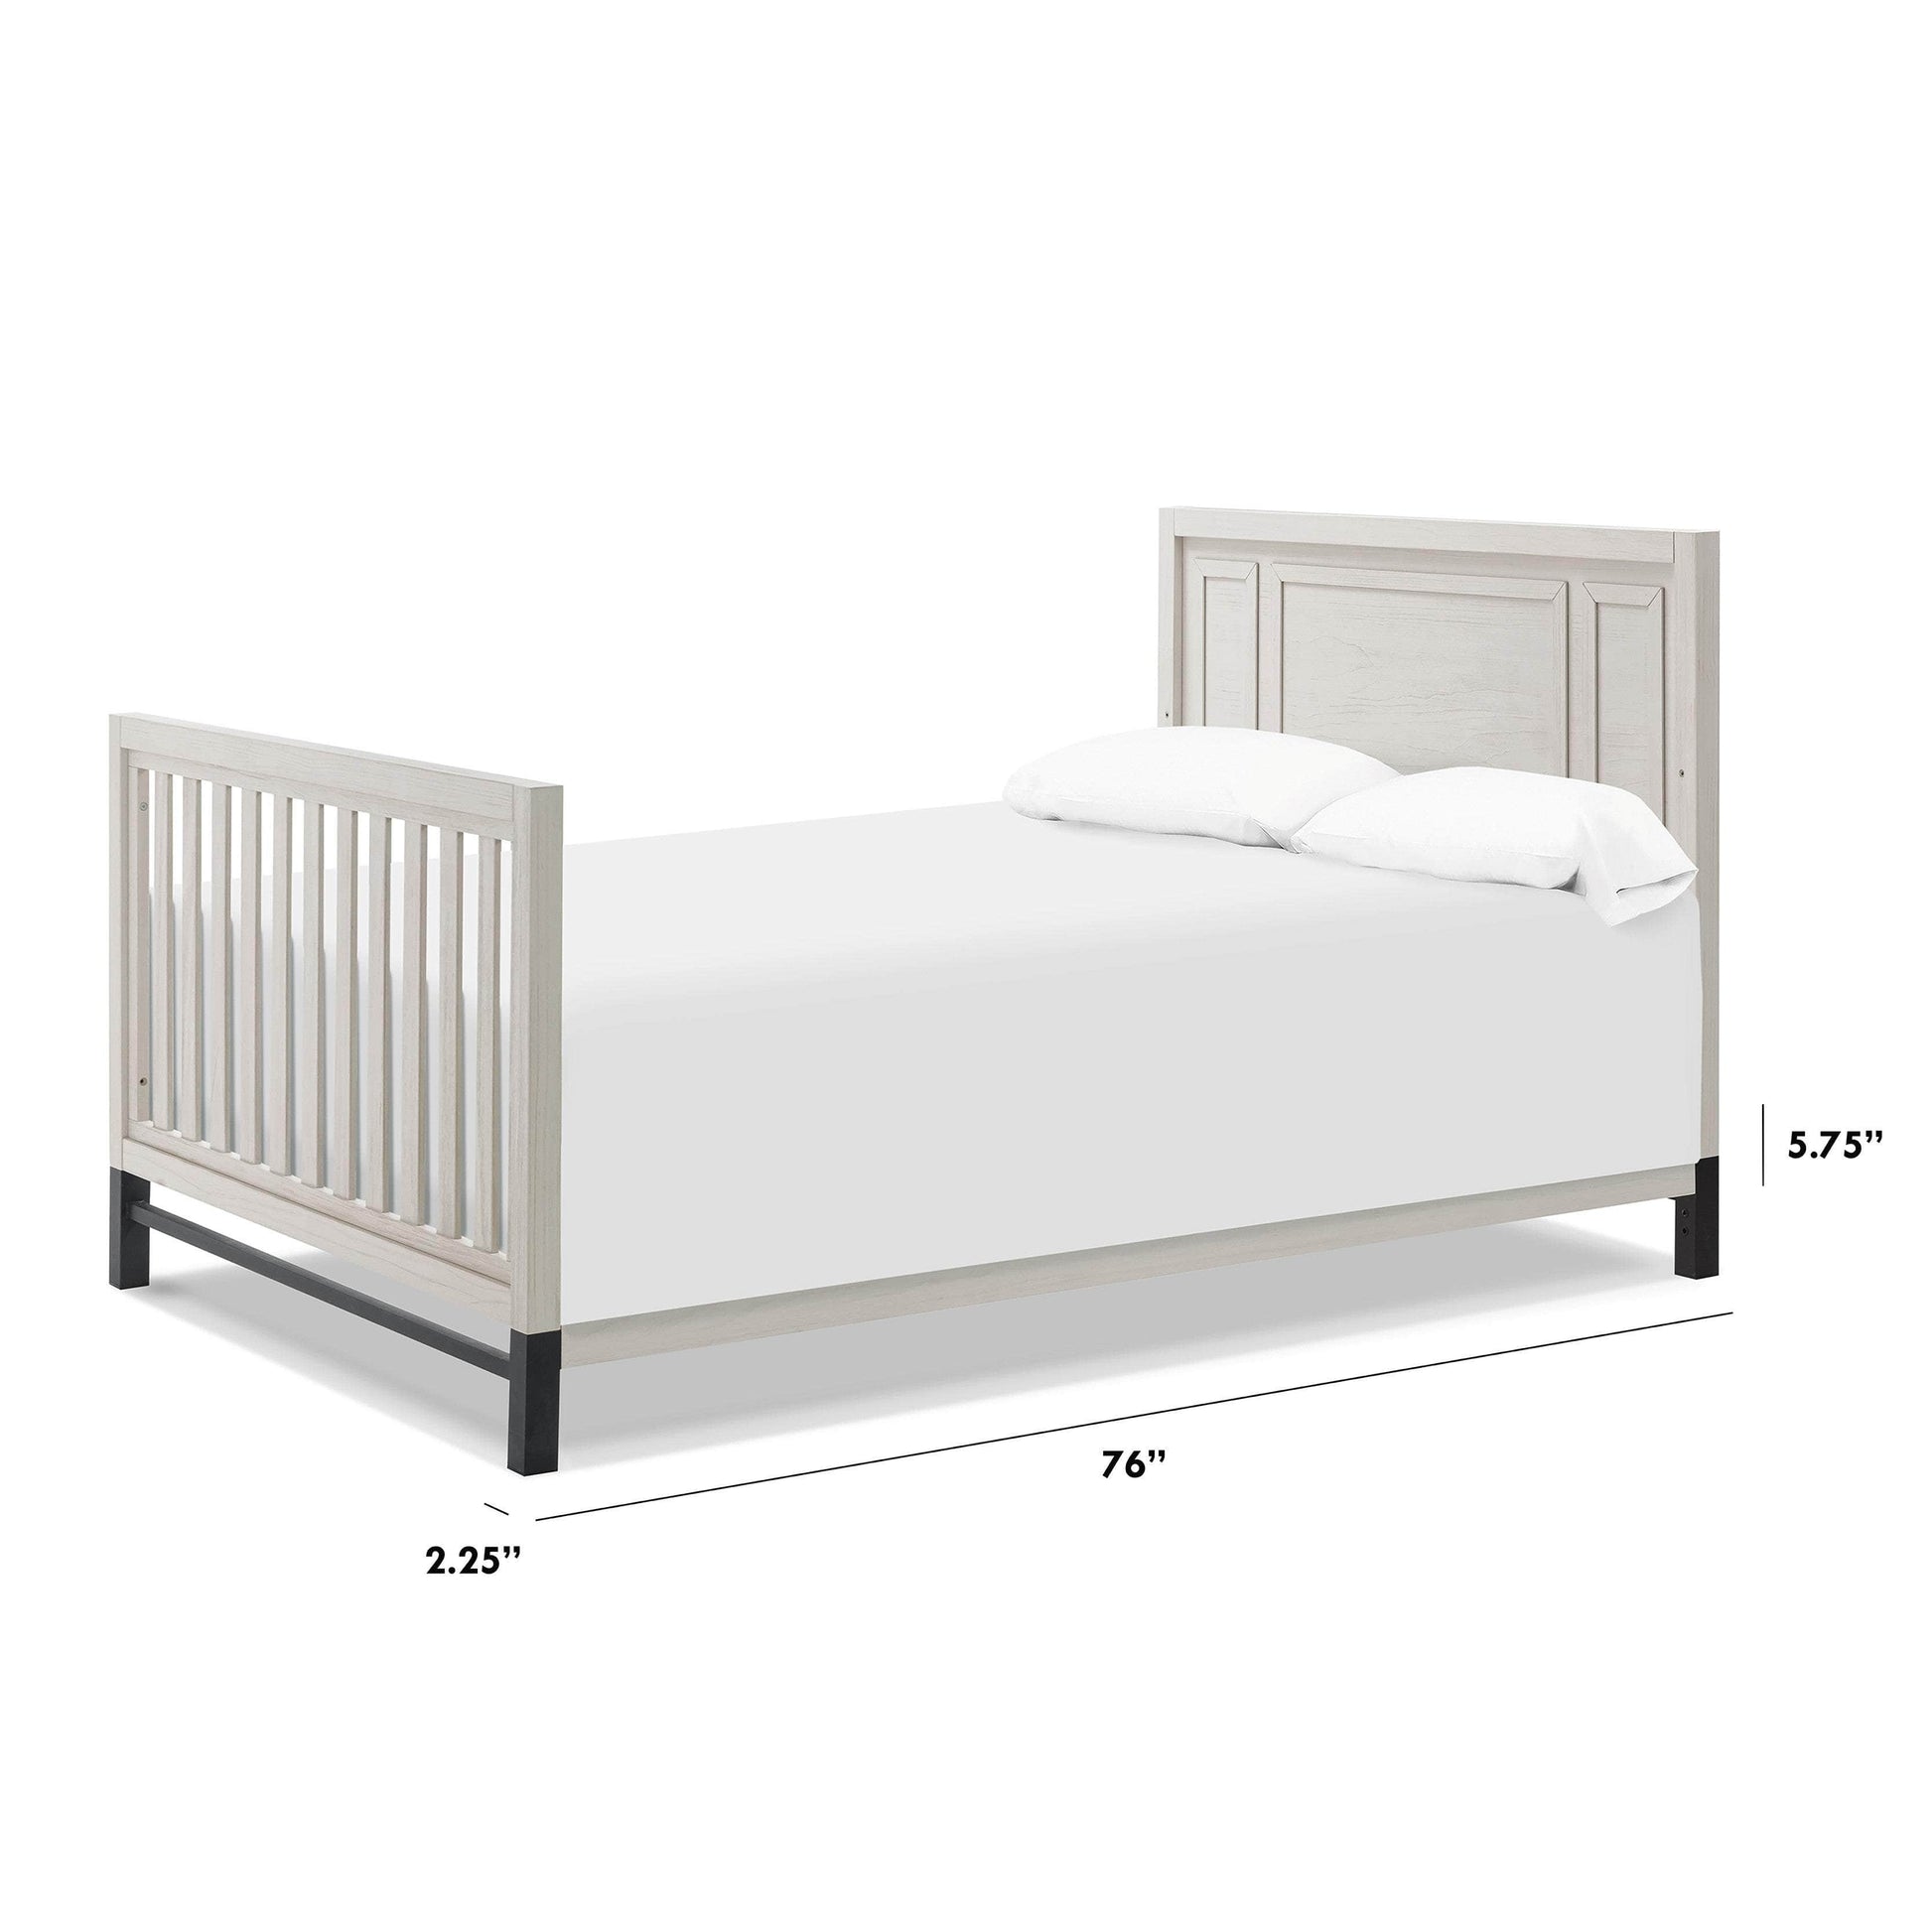 M7689WDF,Full Size Bed Conversion Kit in White Driftwood